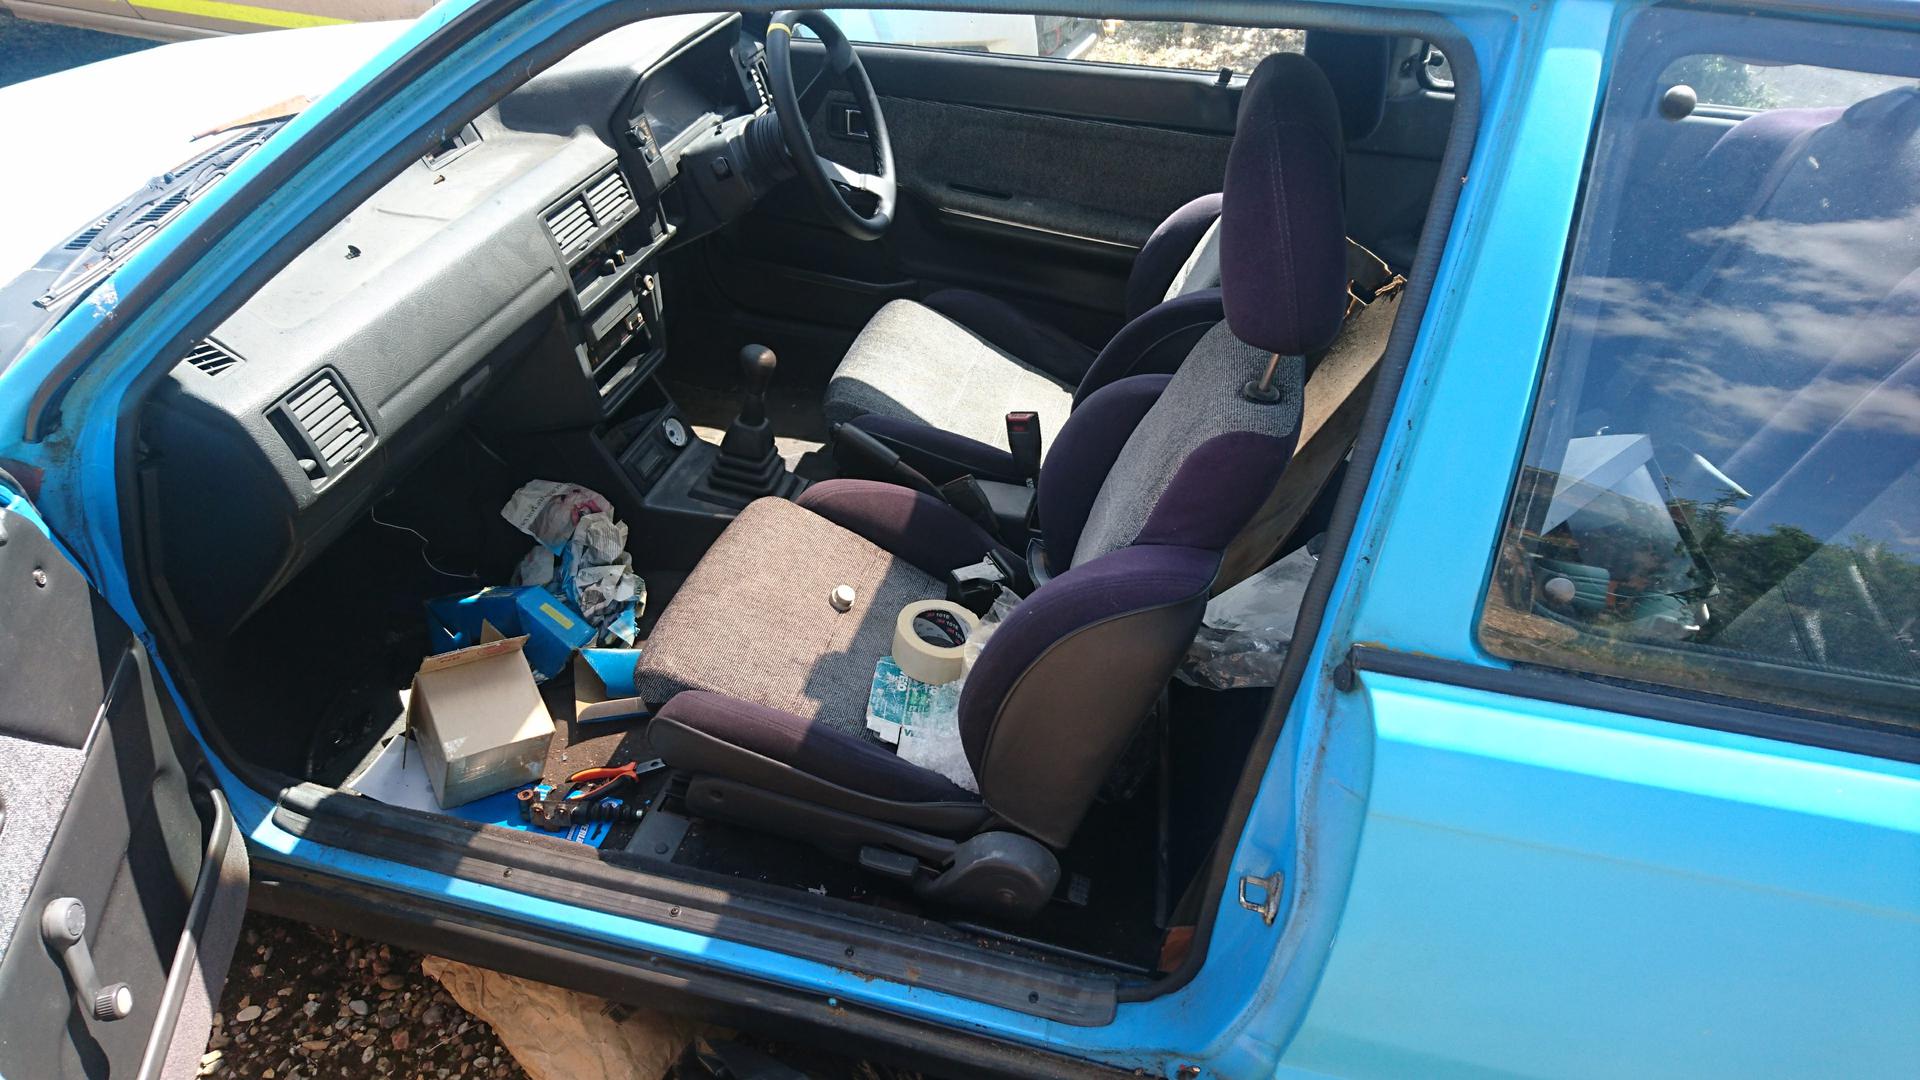 Before picture of my interior: mucky, and with all sorts of mid-project crap in it.